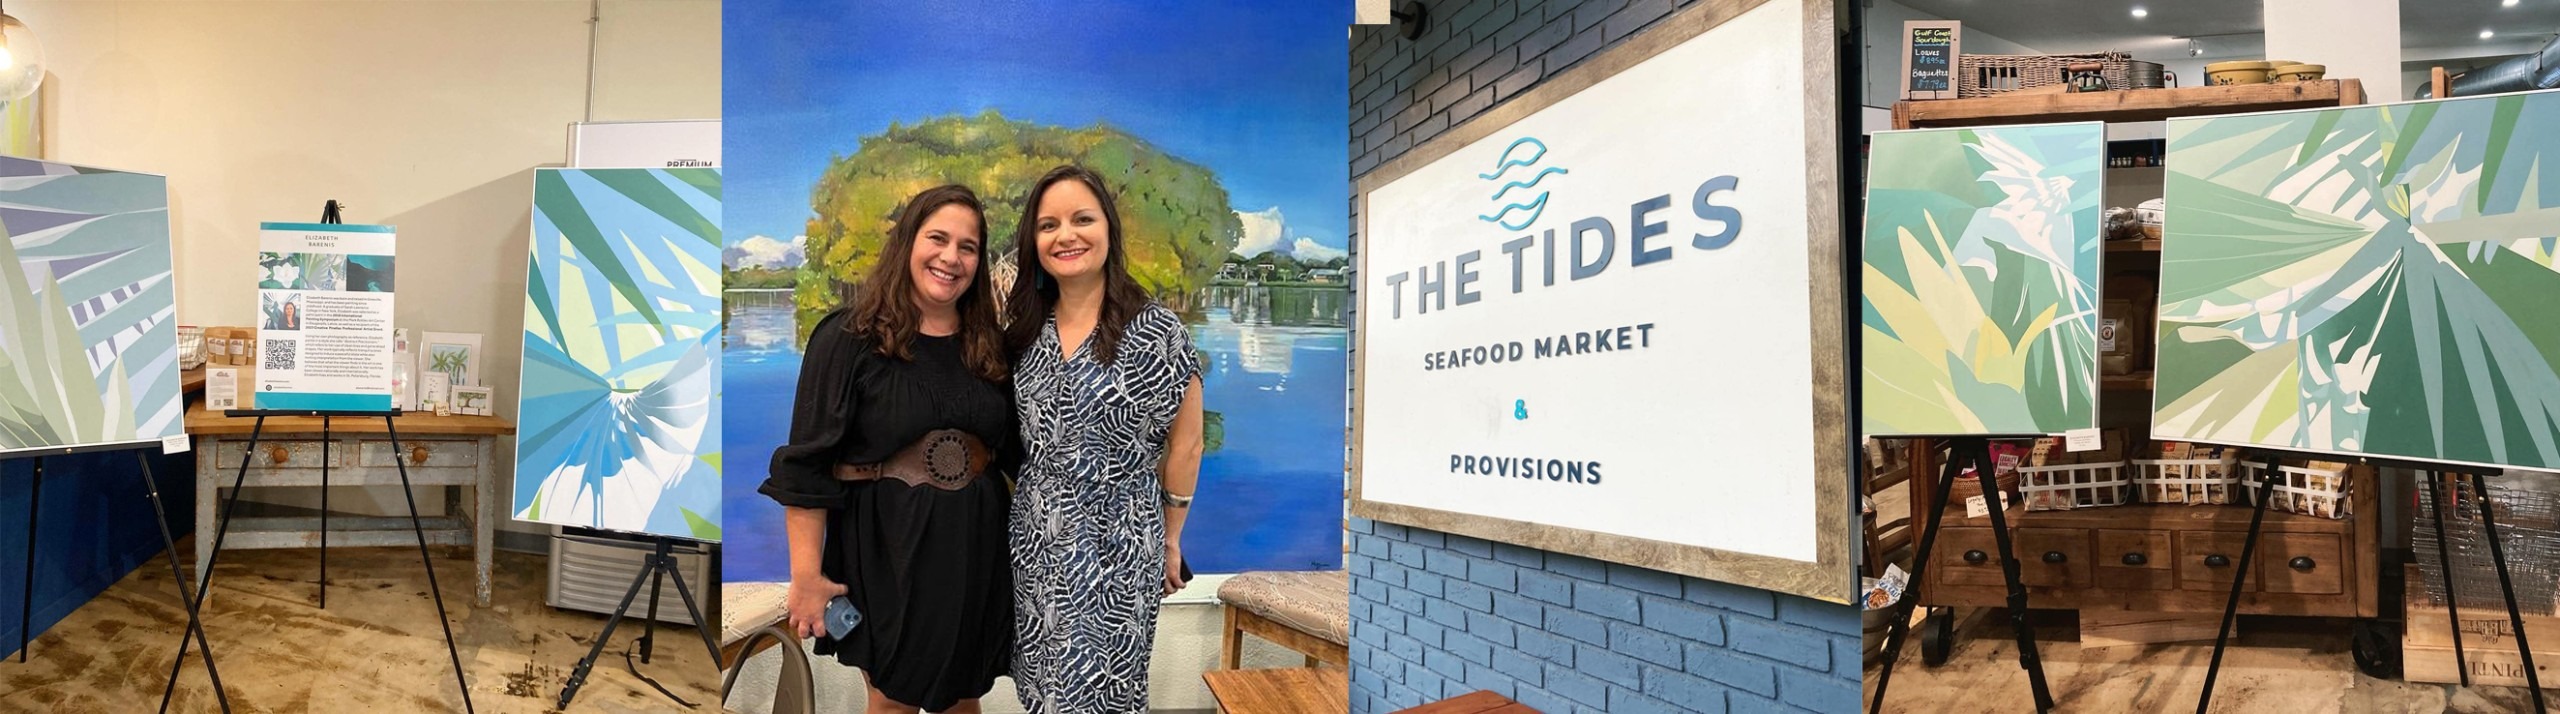 Photos from the meet and greet with artists Elizabeth Barenis and Harriet Monzon-Aguirre at The Tides market in Safety Harbor, Florida.